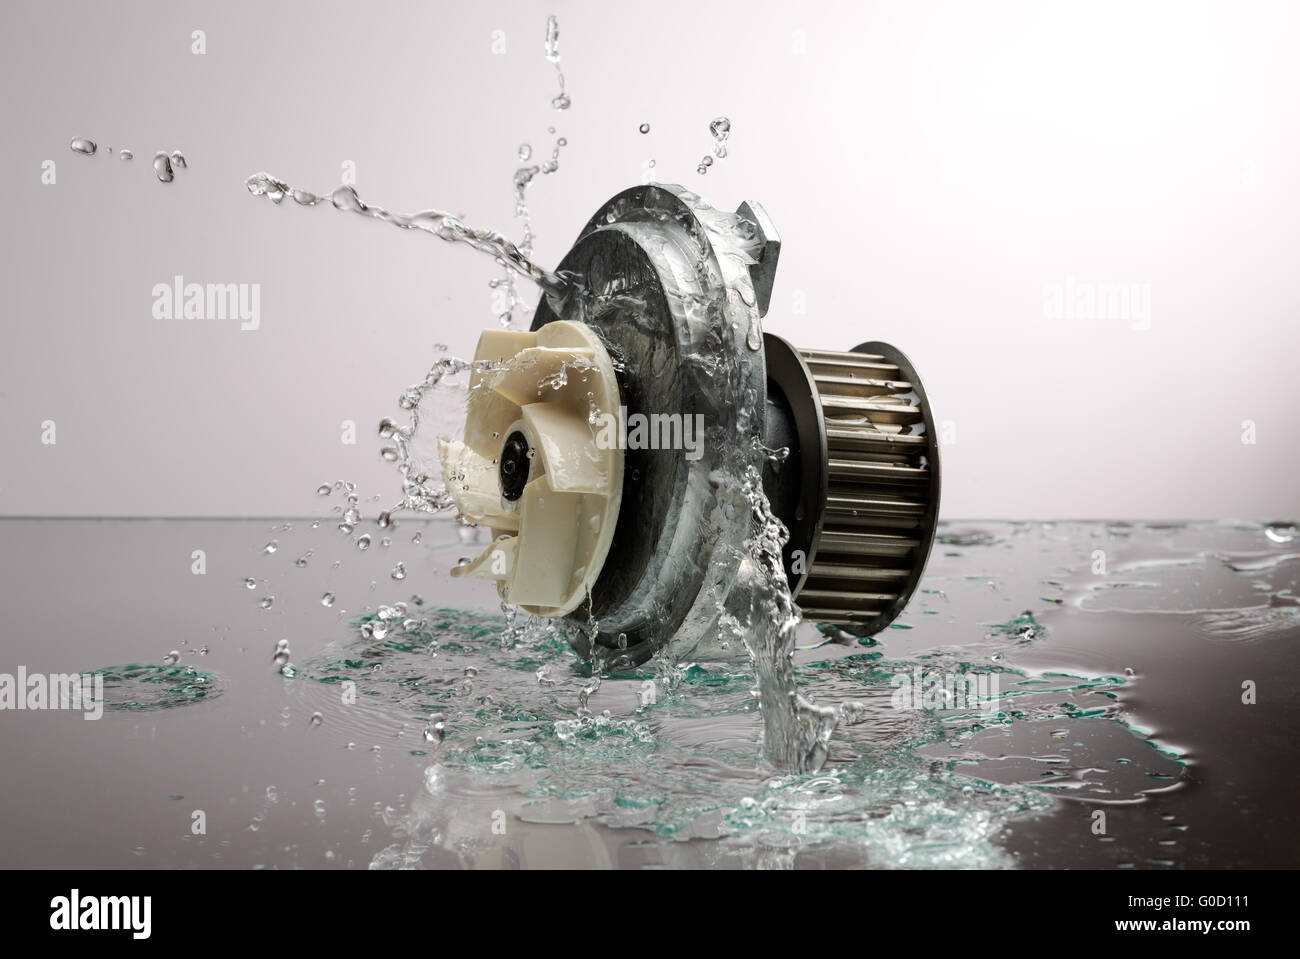 Engine Cooling High Resolution Stock Photography and Images - Alamy